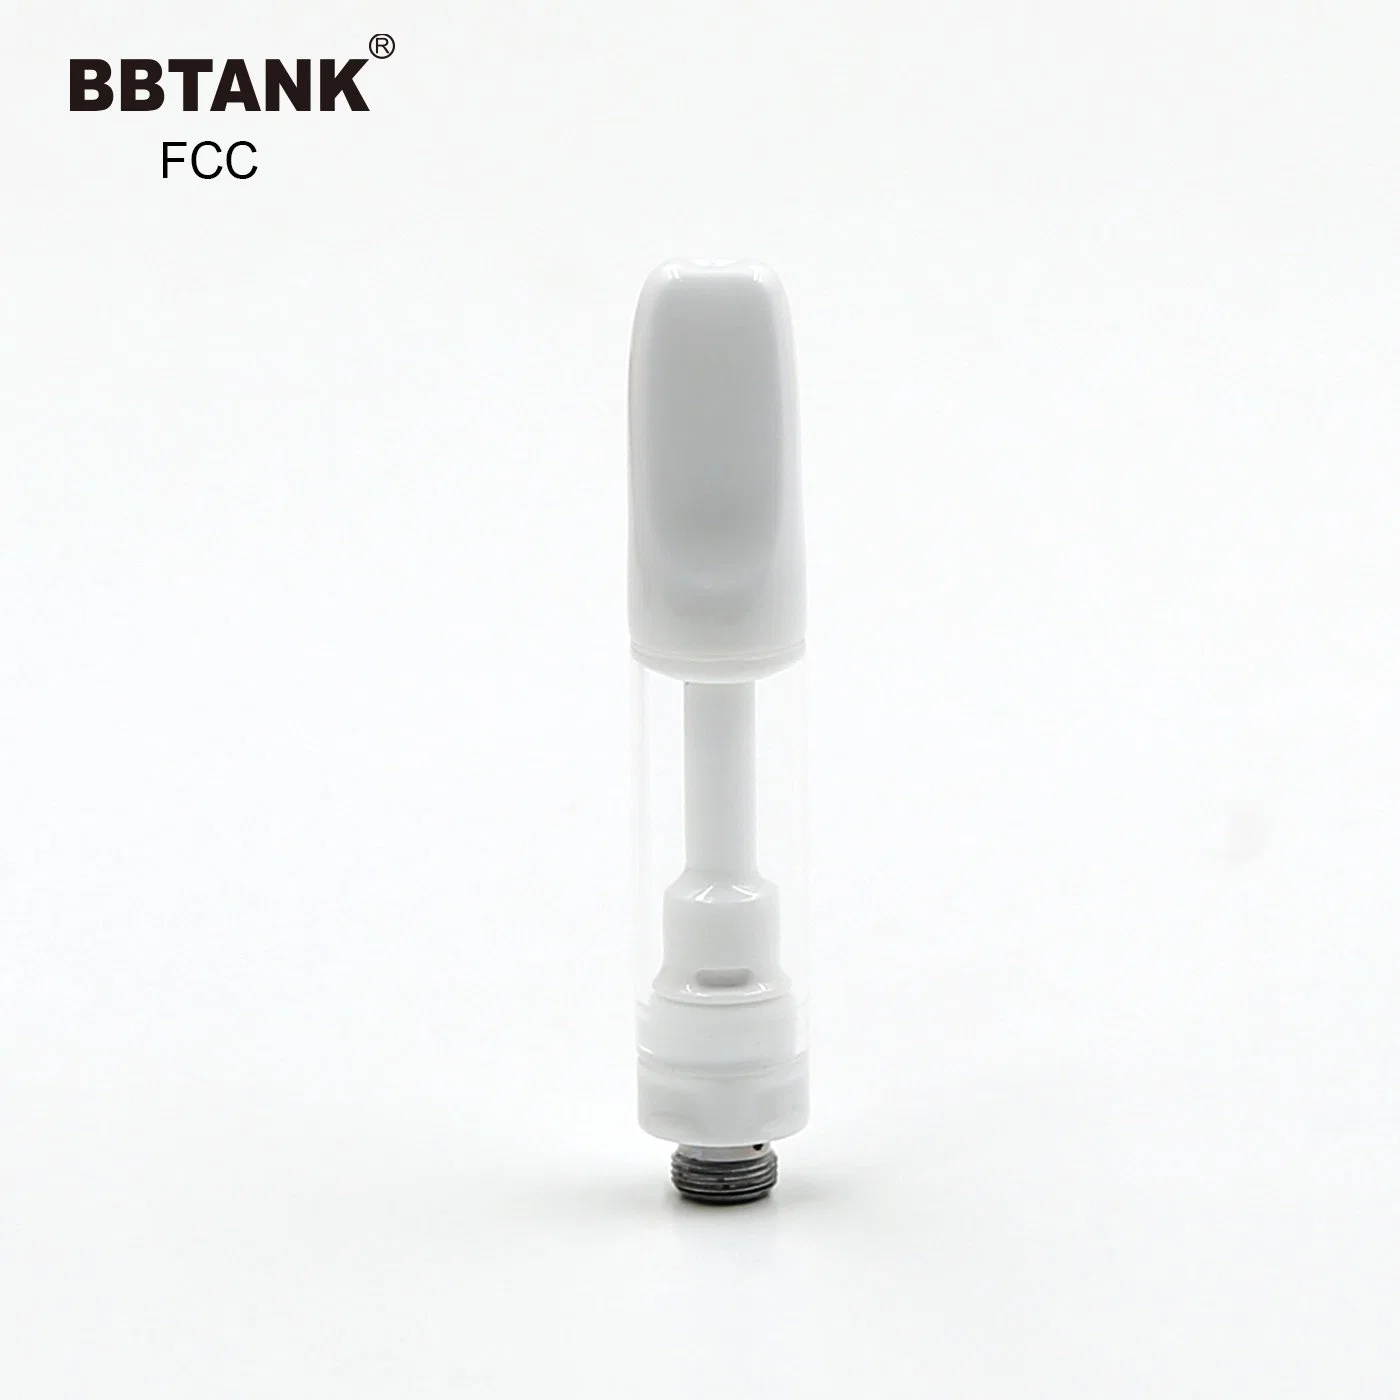 Bbtank FCC Full Ceramic 510 Thread Thick Oil Cartridge 1 Ml 0.5 Ml Wholesale Disposable Vape Pen Atomizer with Packaging Box